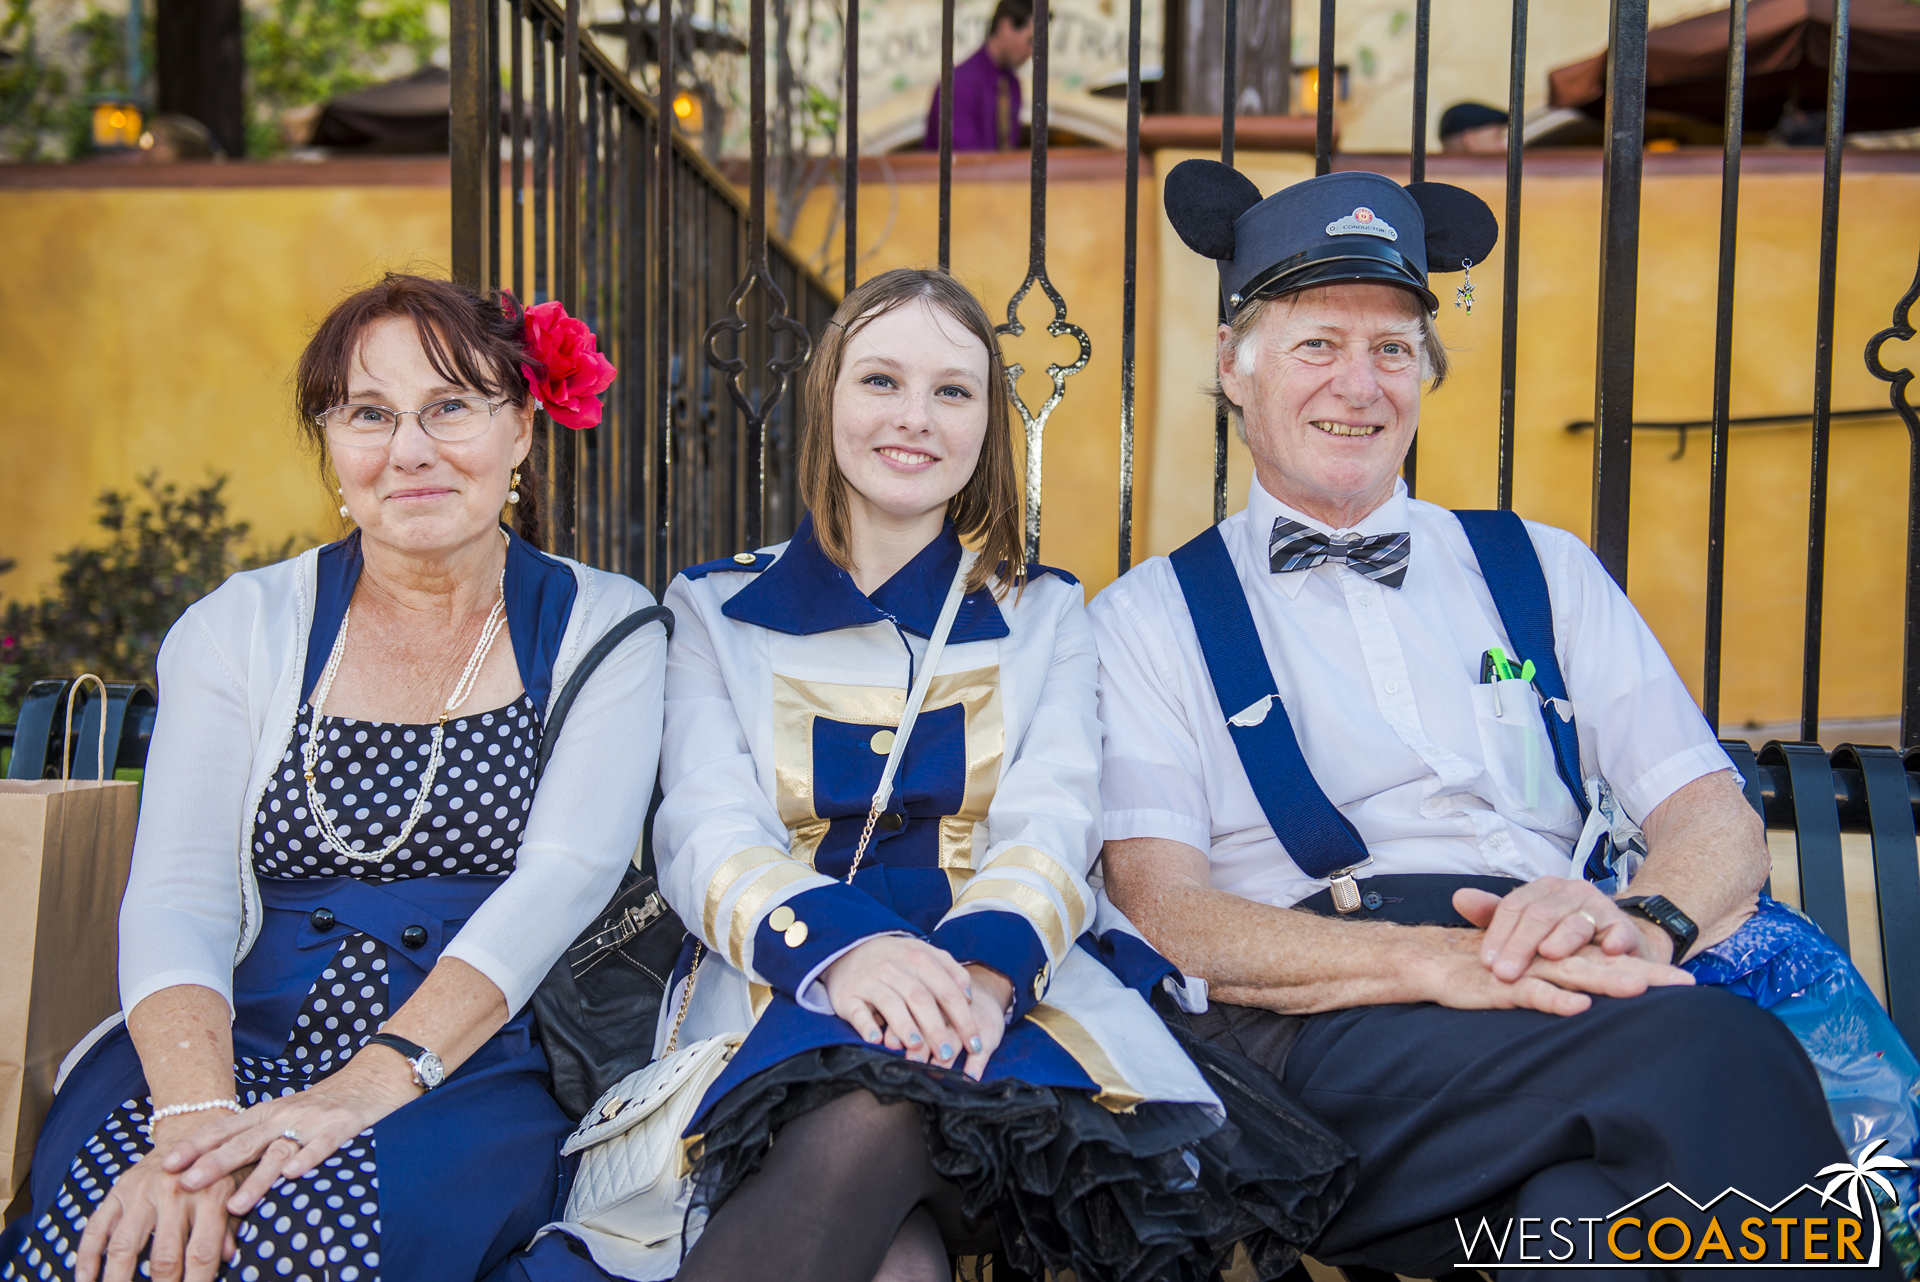  This family seemed to coordinate along the Fantasy Faire cast member outfit motif. 